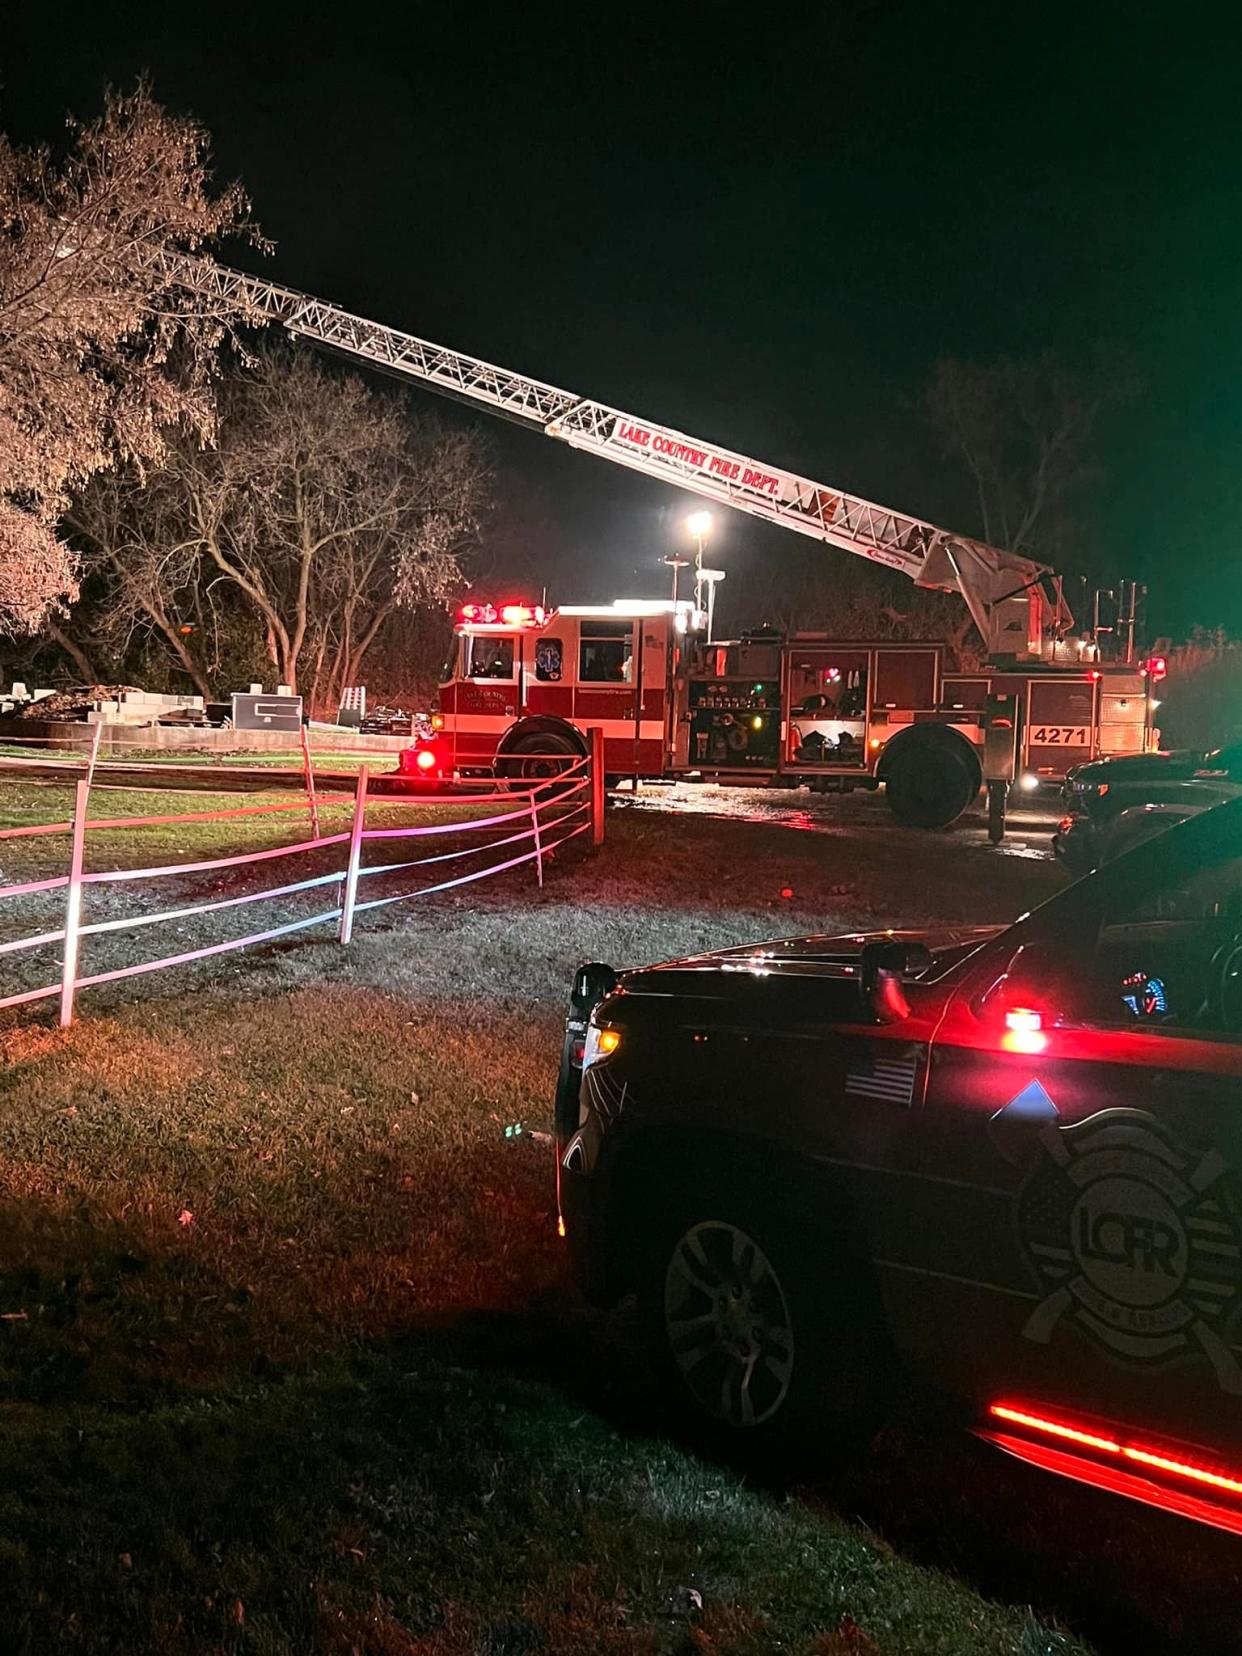 A Lake Country Fire & Rescue team fights a stable fire early Tuesday morning, Nov. 15, 2022. The needs of the multi-community fire department is the subject of referendums in the city and town of Delafield in April.